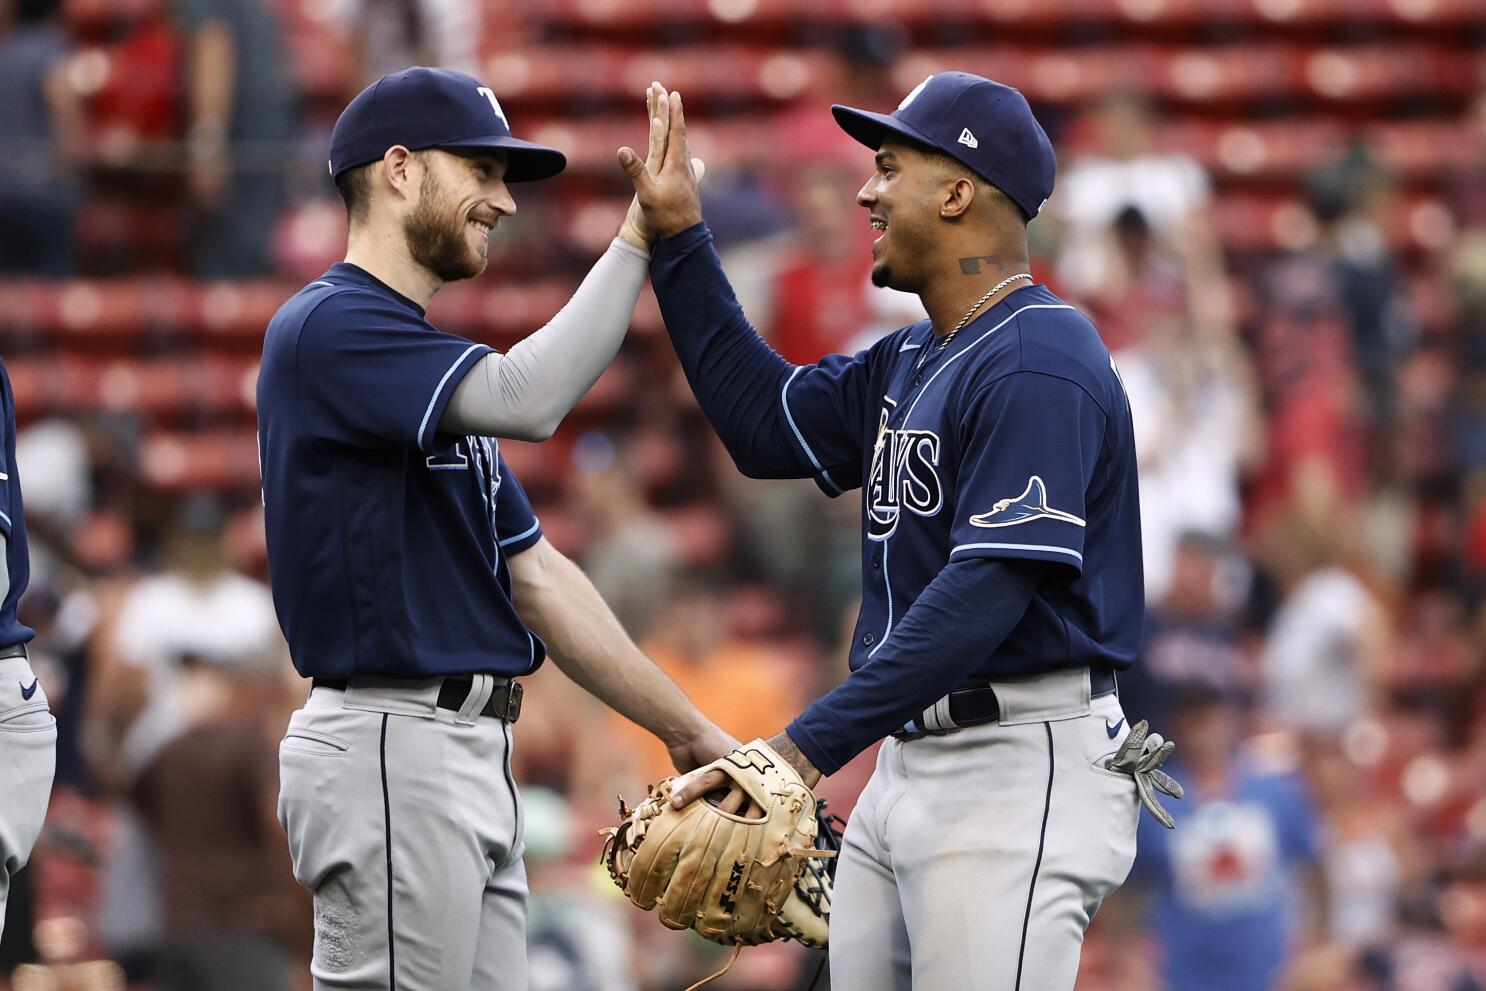 Rays blow lead in 9th inning, then lose in 10th to Mets